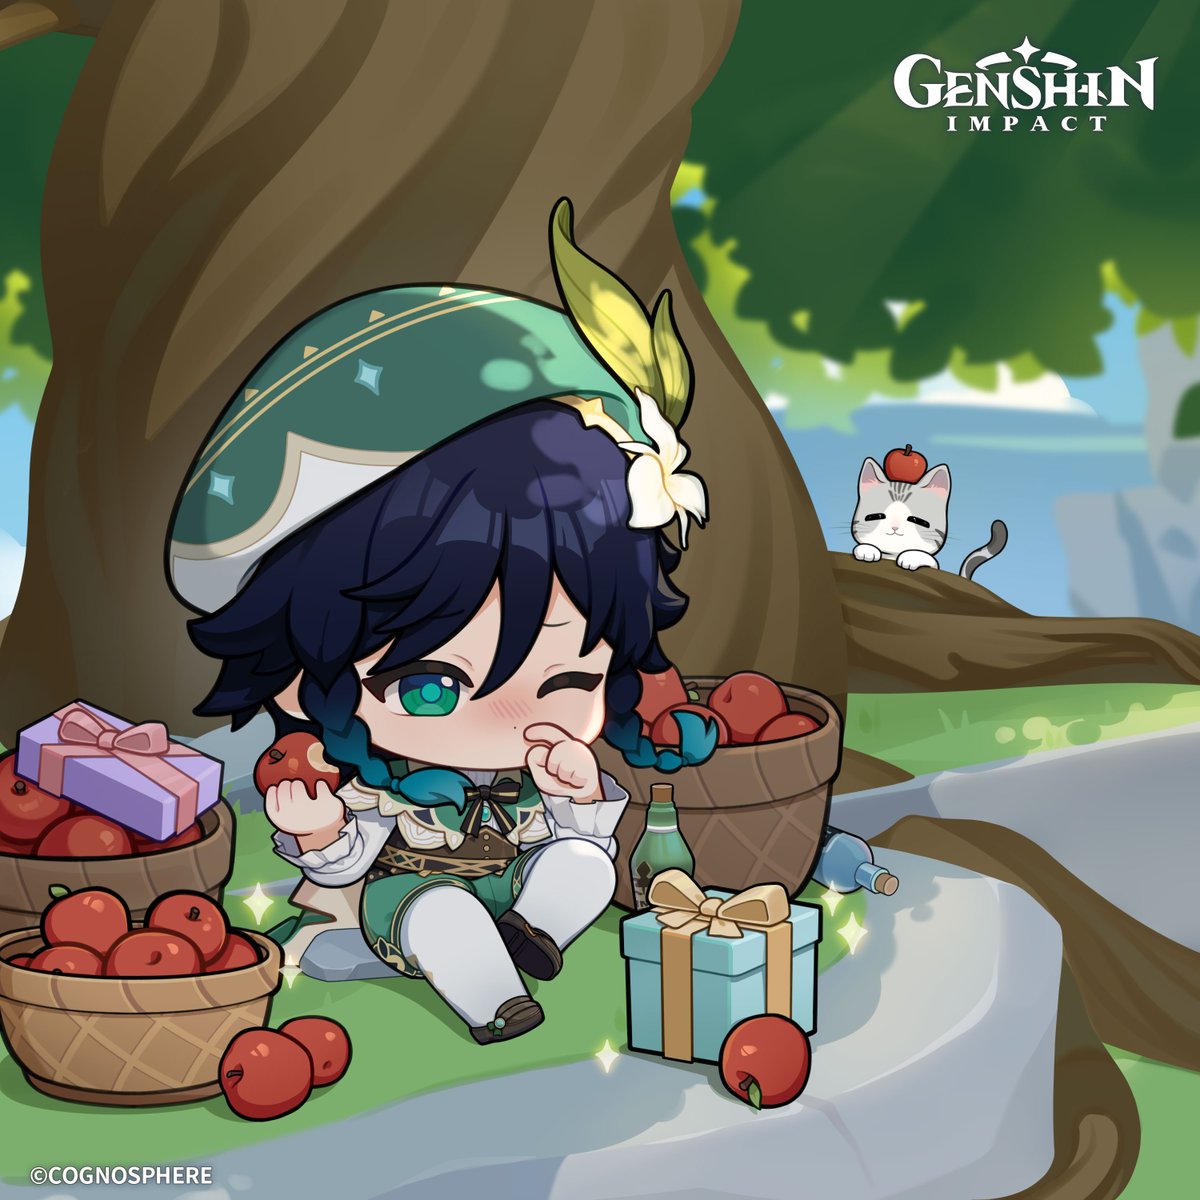 Happy Birthday, Venti!

'Together with you, even apples taste sweeter.'
'But something isn't quite right, it feels like... I'm gonna s—sneeze.'

Participate in Venti's birthday event >>> hoyo.link/79rDDBAd

#GenshinImpact #Venti